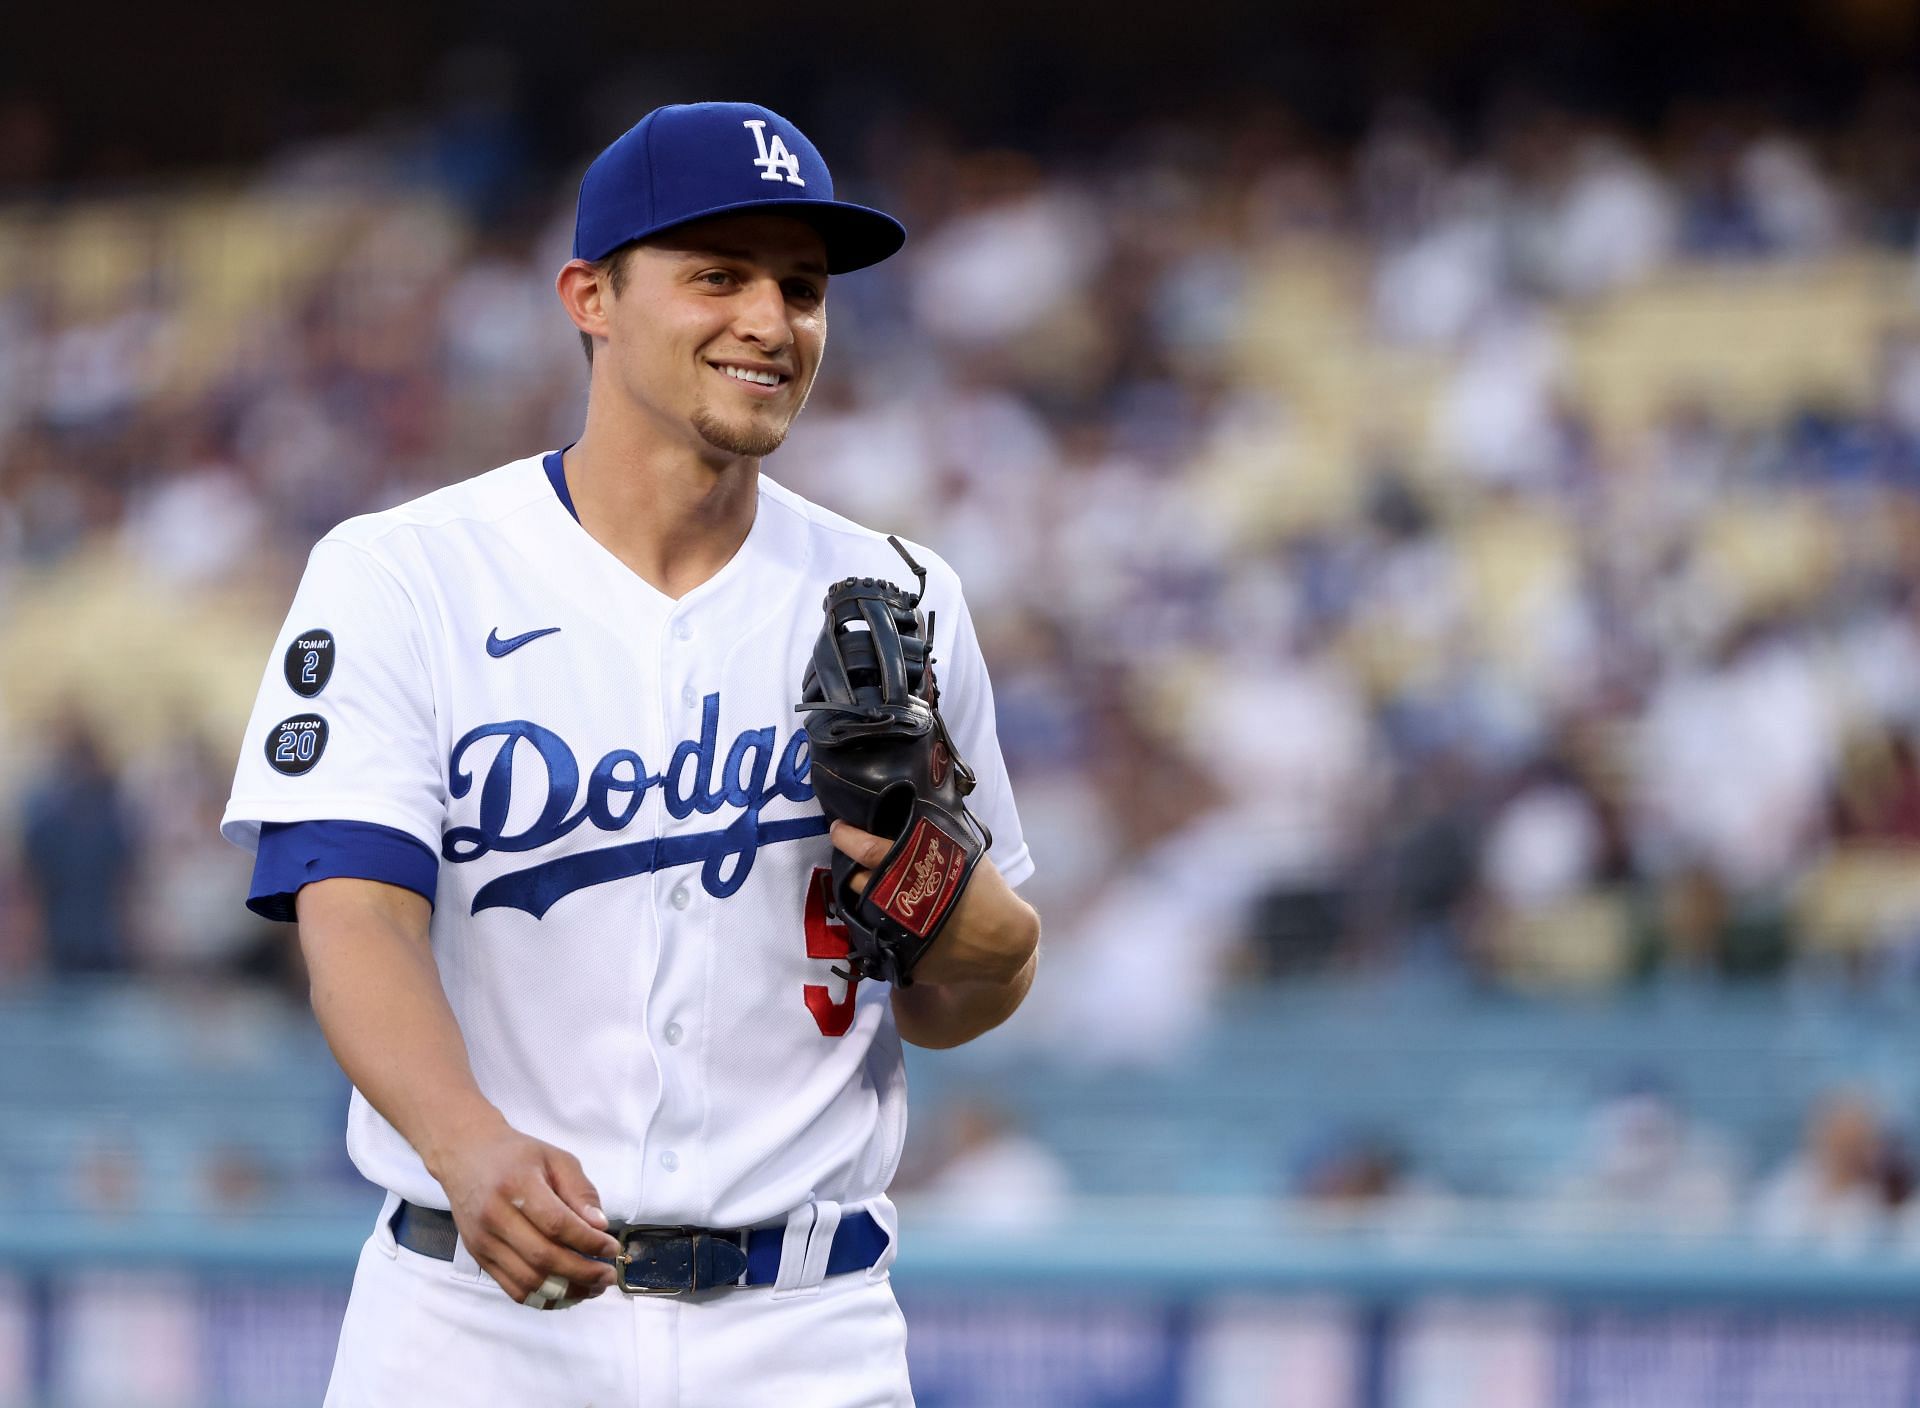 MLB Rumors: Texas Rangers going hard for Corey Seager, Los Angeles Dodgers  infielder - Lone Star Ball